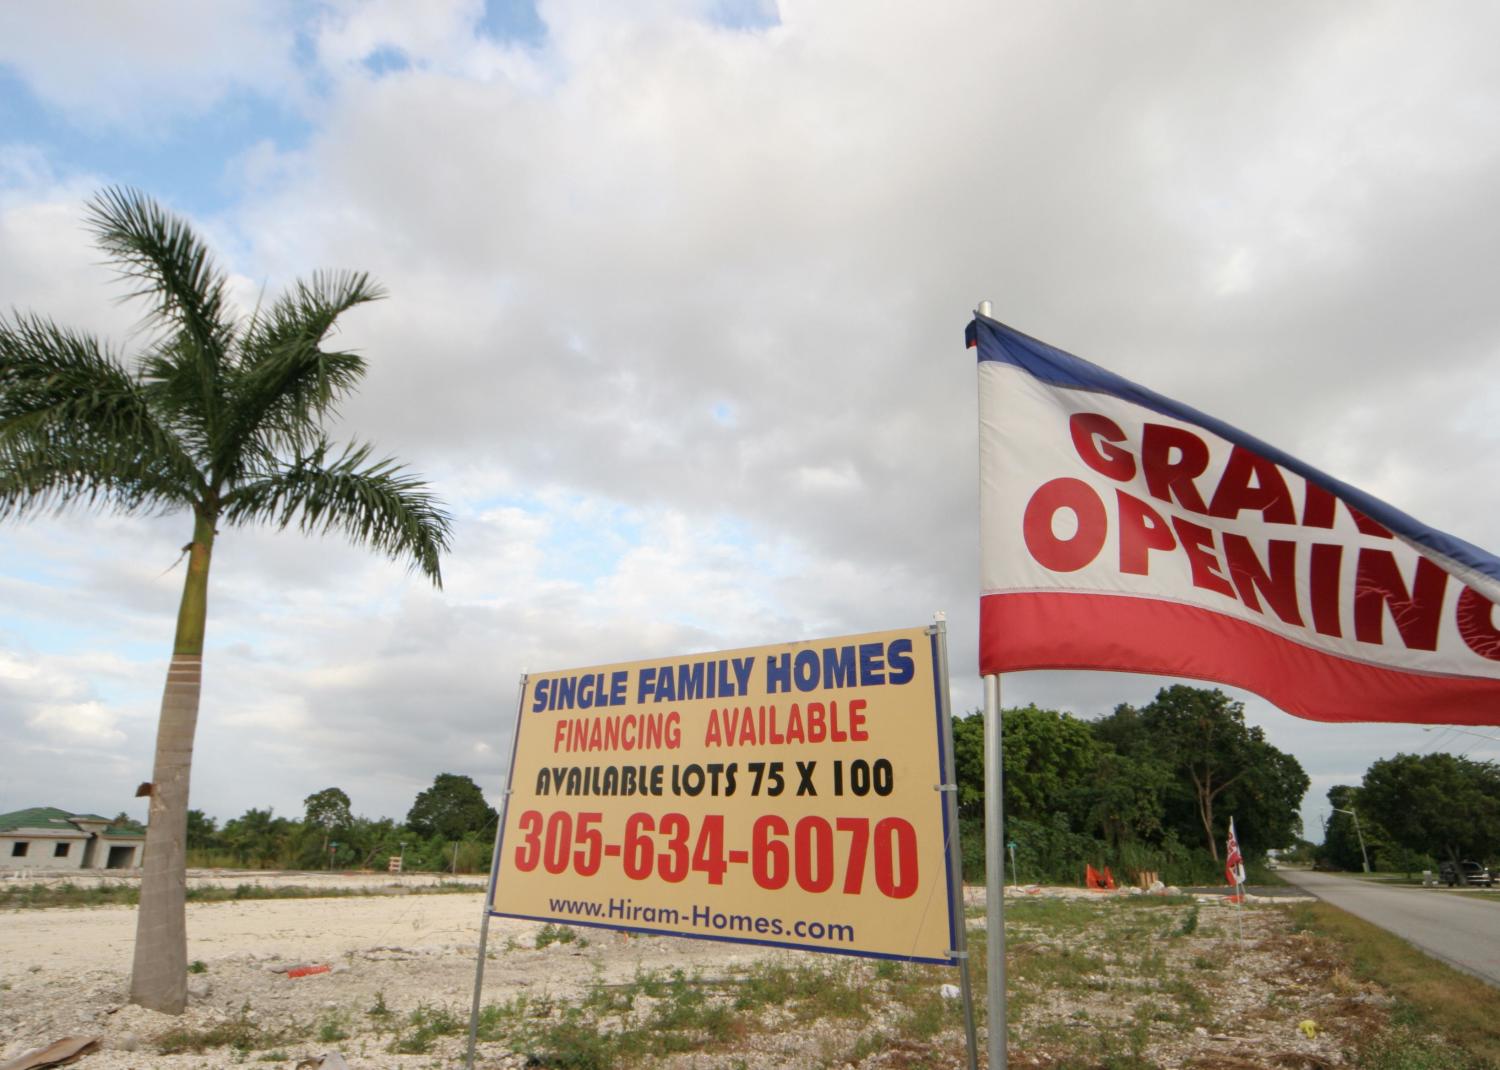 Empty Lot with single palm tree, sign, and Grand Opening flag - Source: Jeffrey Greenberg/Universal Images Group // Getty Images